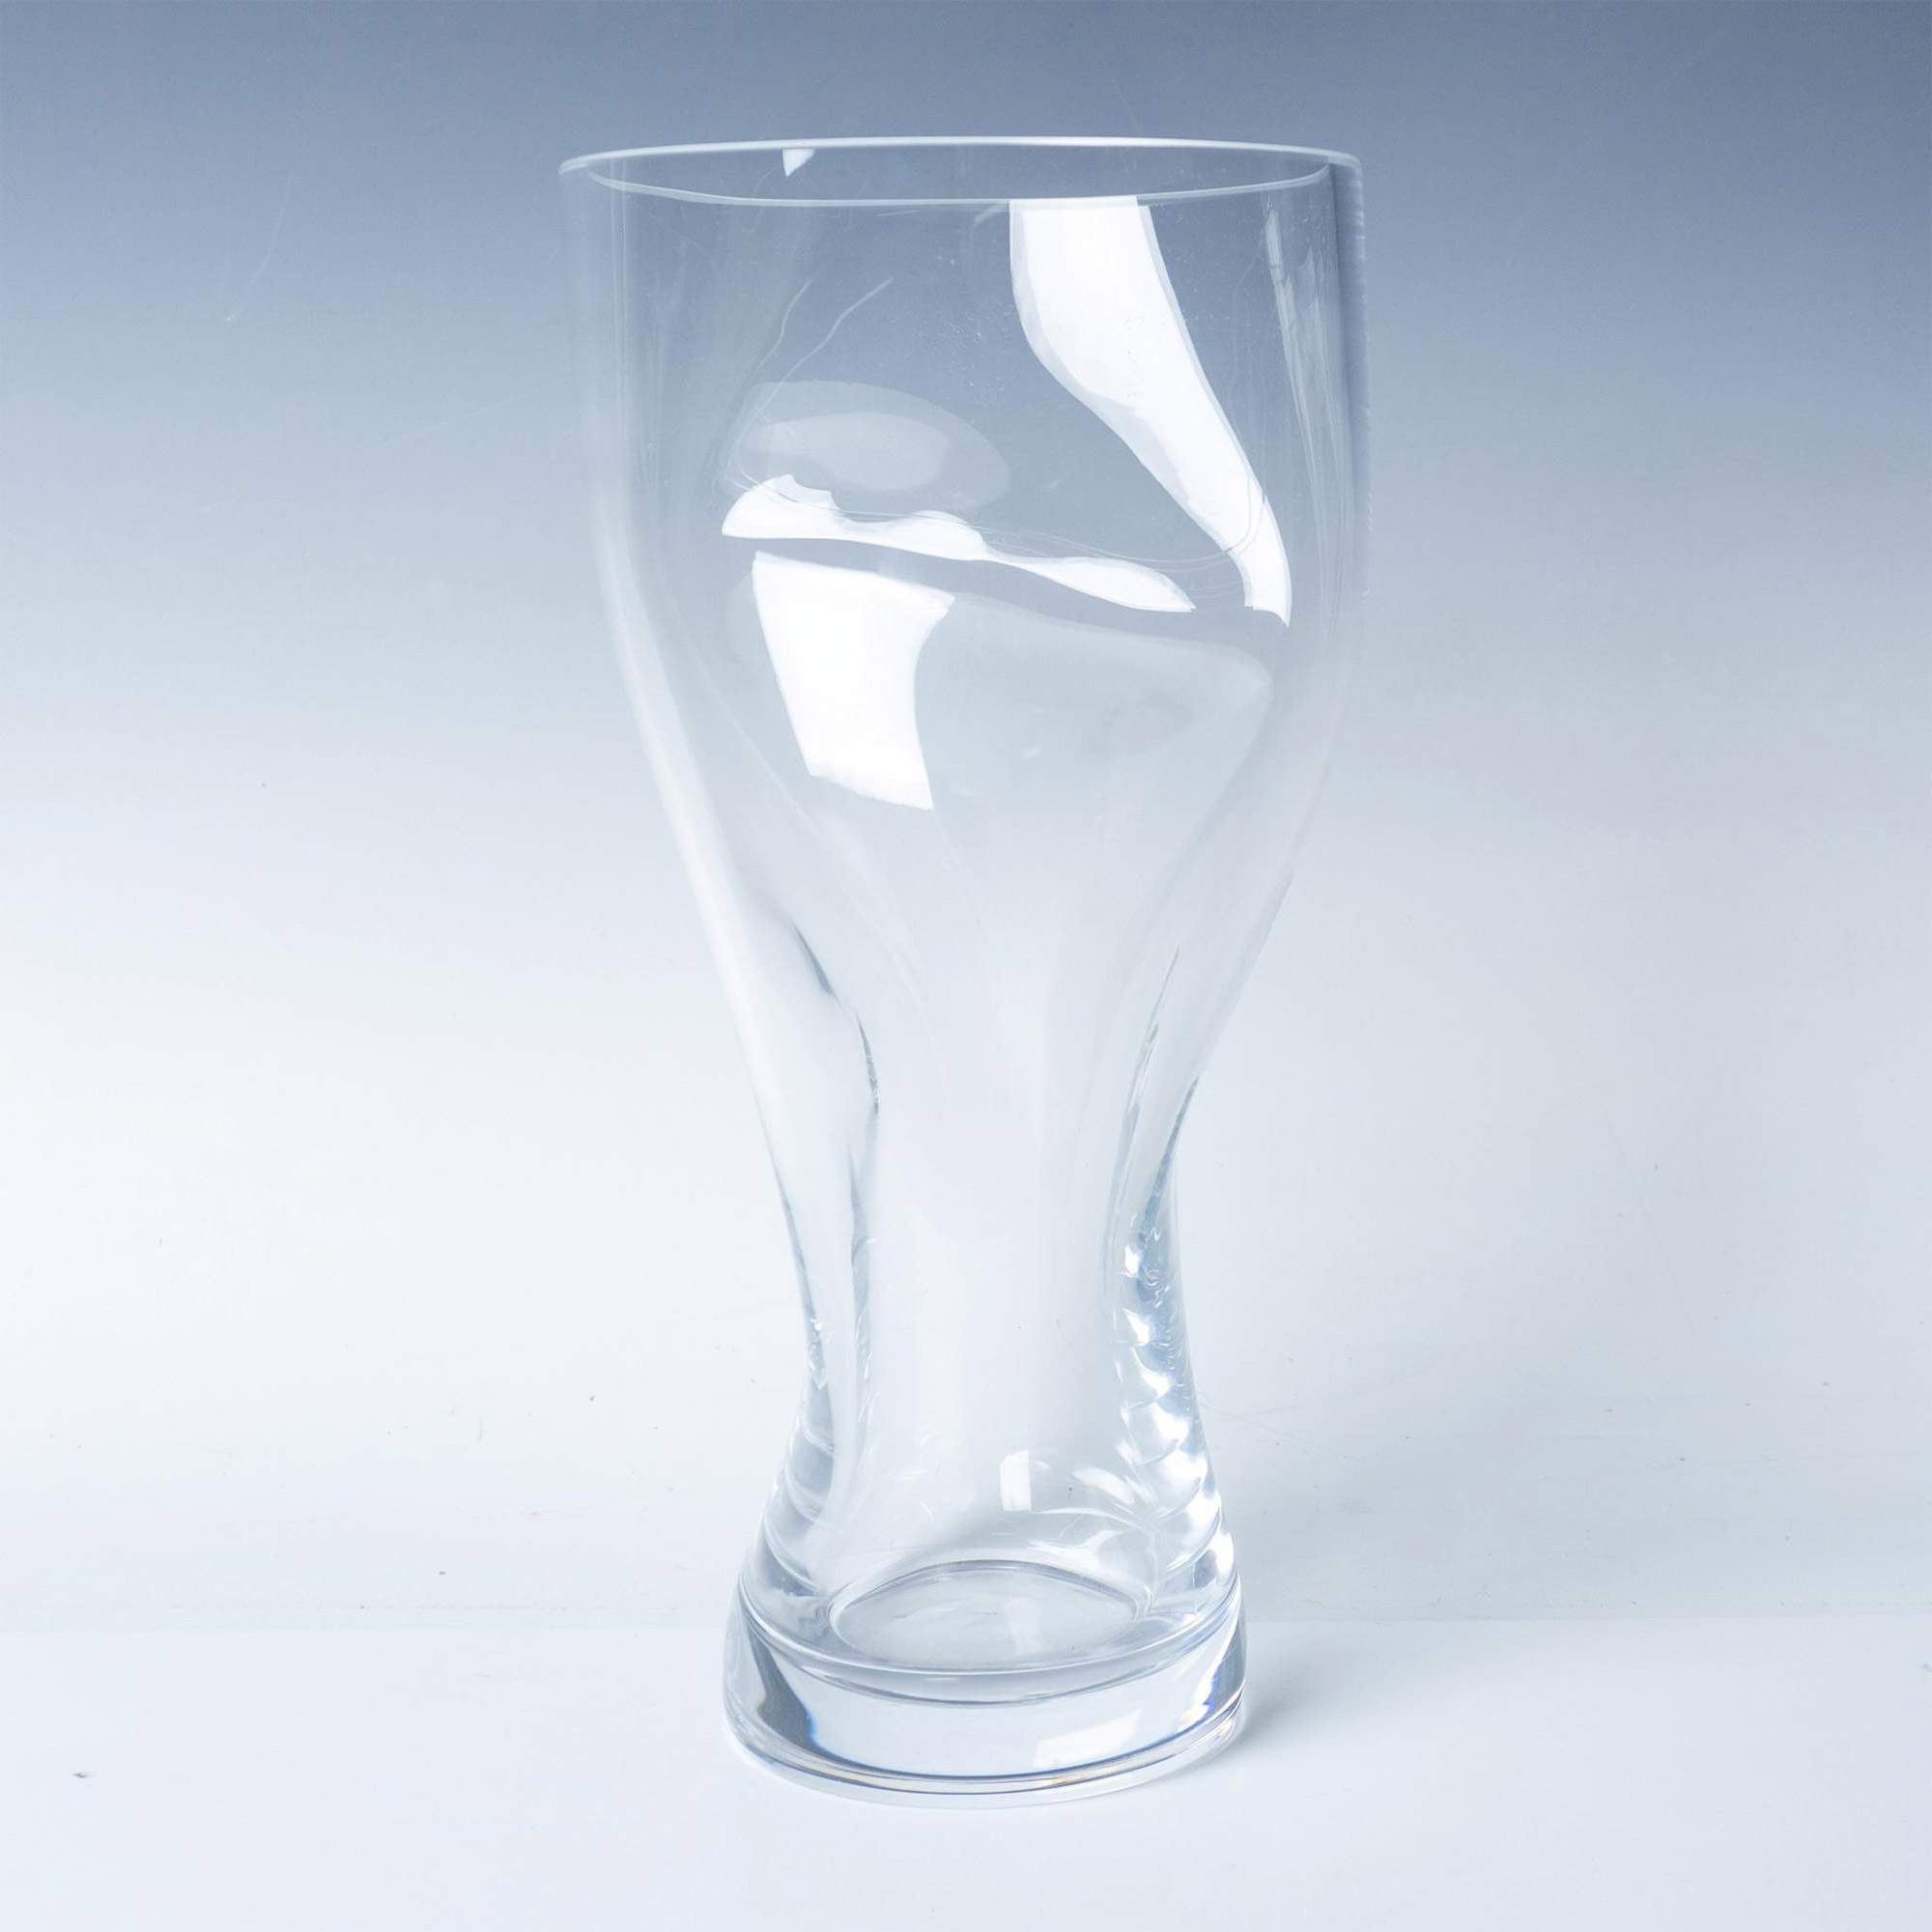 Orrefors Clear Crystal Vase, Squeeze Pattern - Image 3 of 4